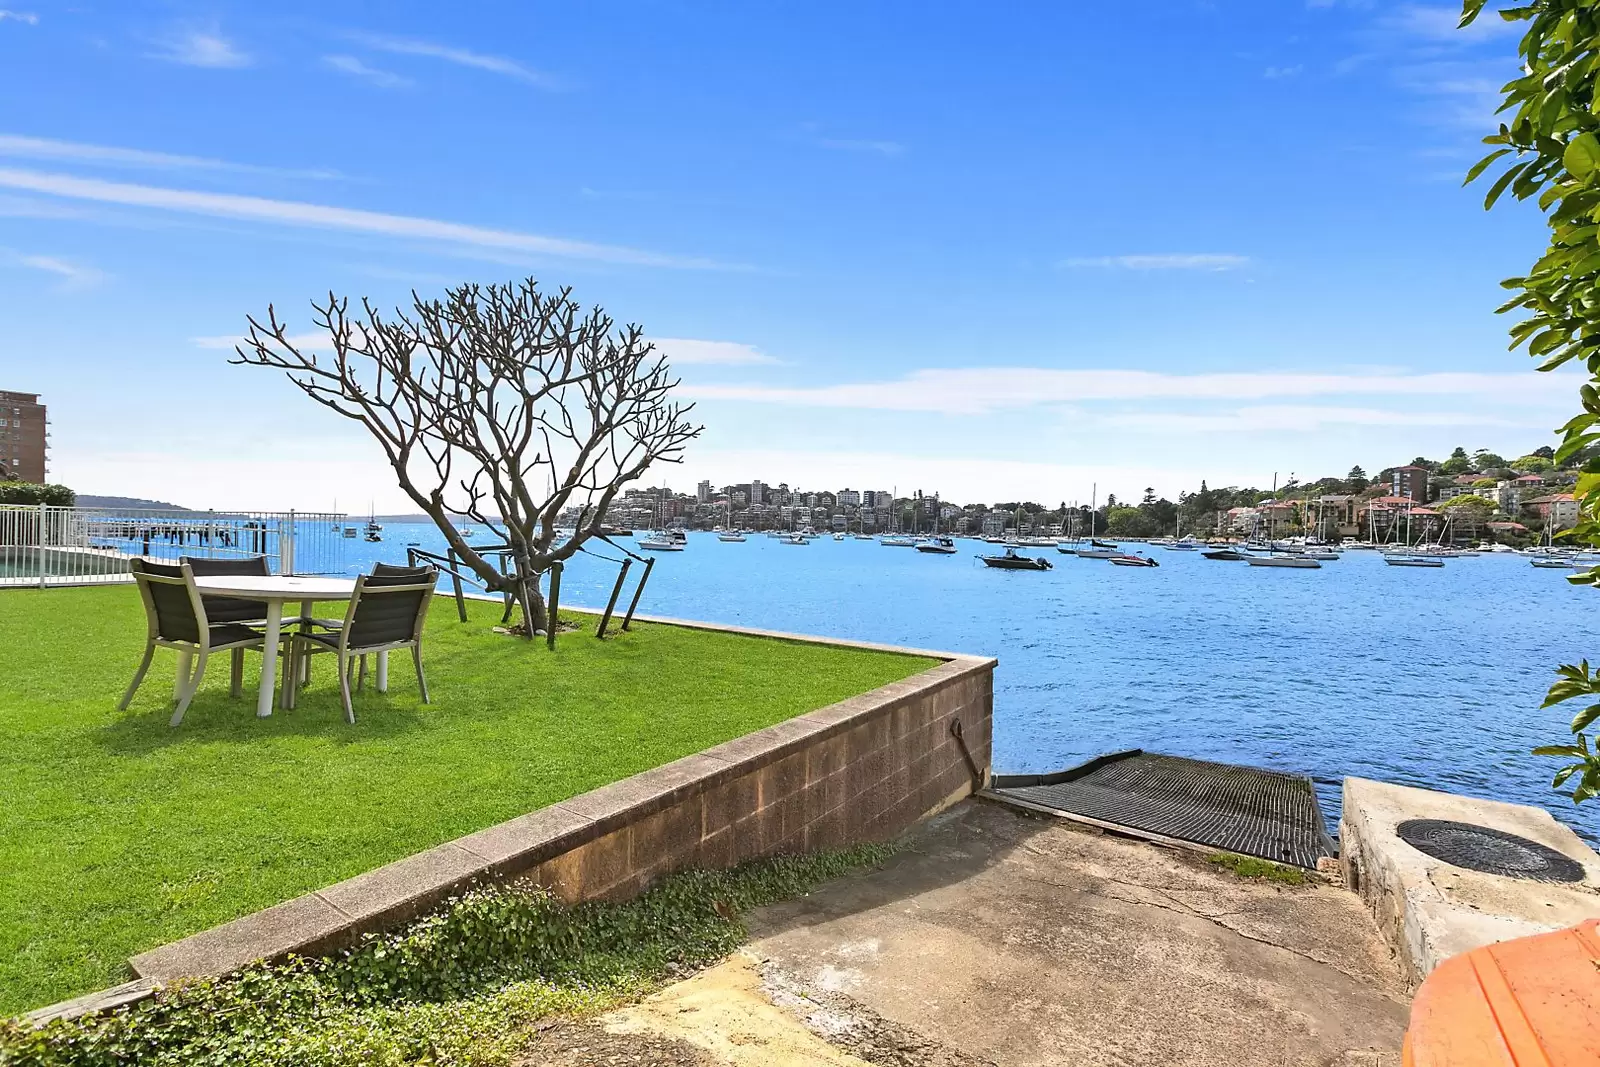 Photo #19: 35/35A Sutherland Crescent, Darling Point - Sold by Sydney Sotheby's International Realty